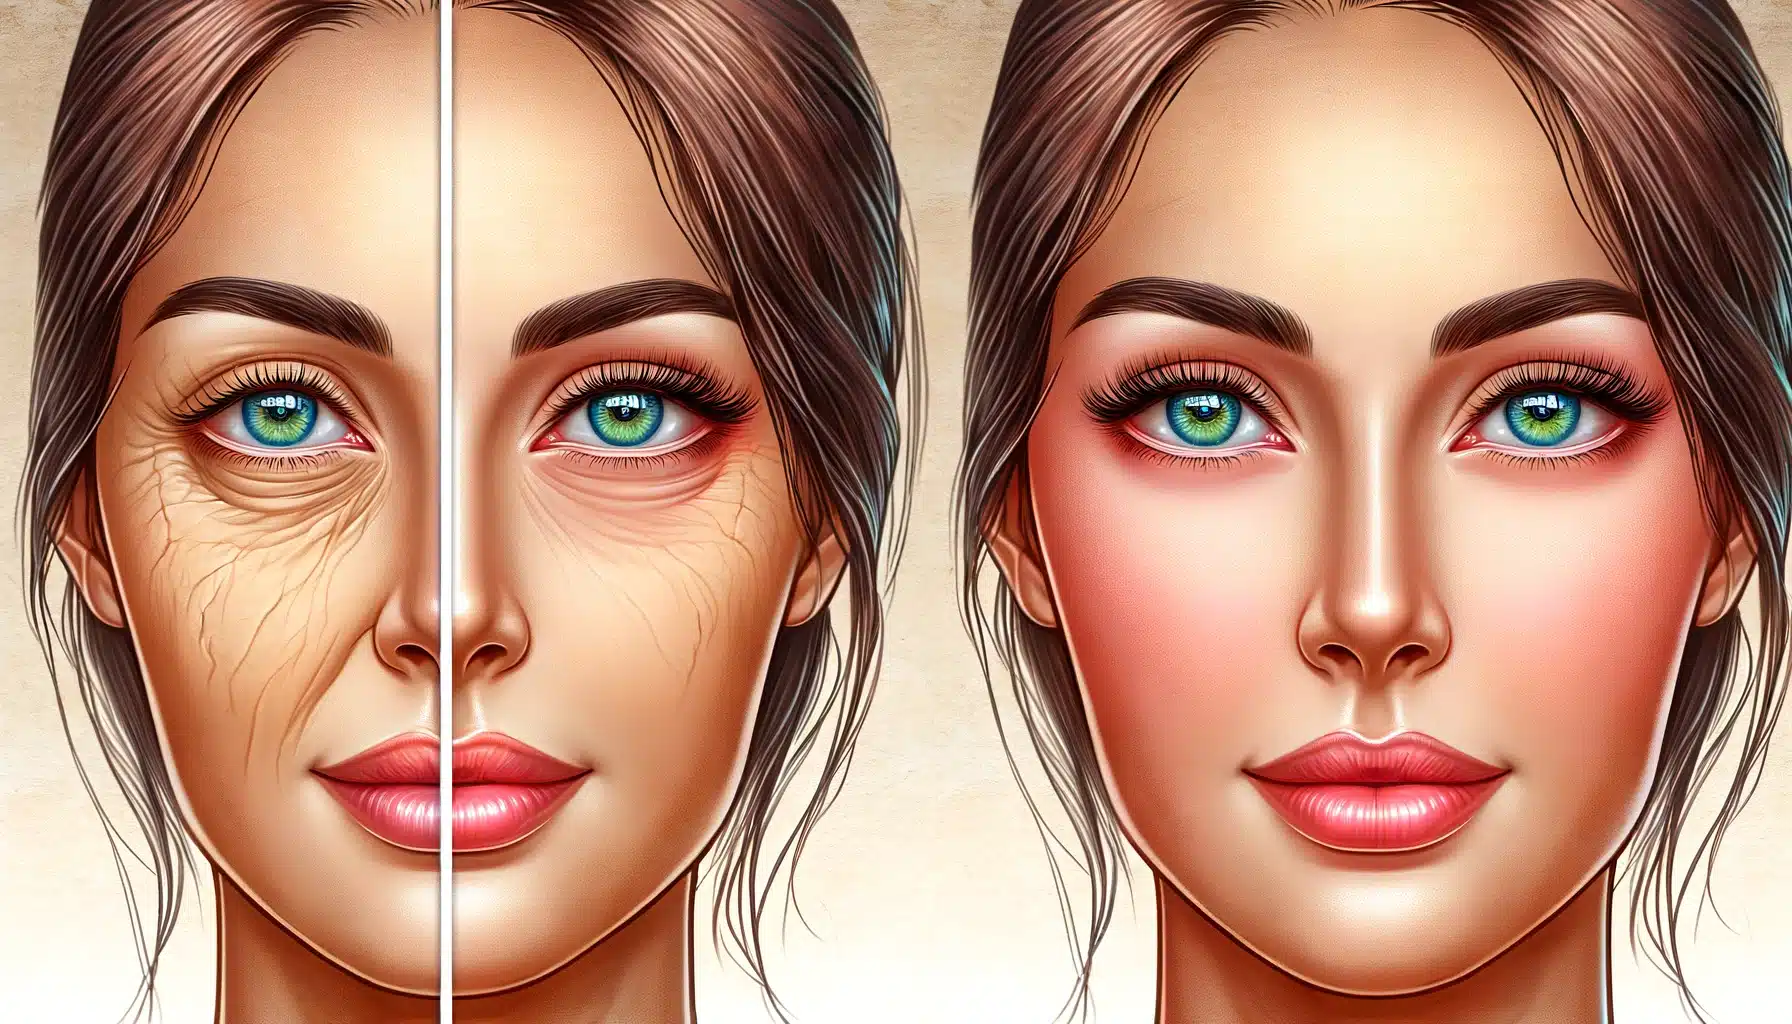 People often wonder about the difference between a brow lift or eyelid surgery and the associated benefits of each.